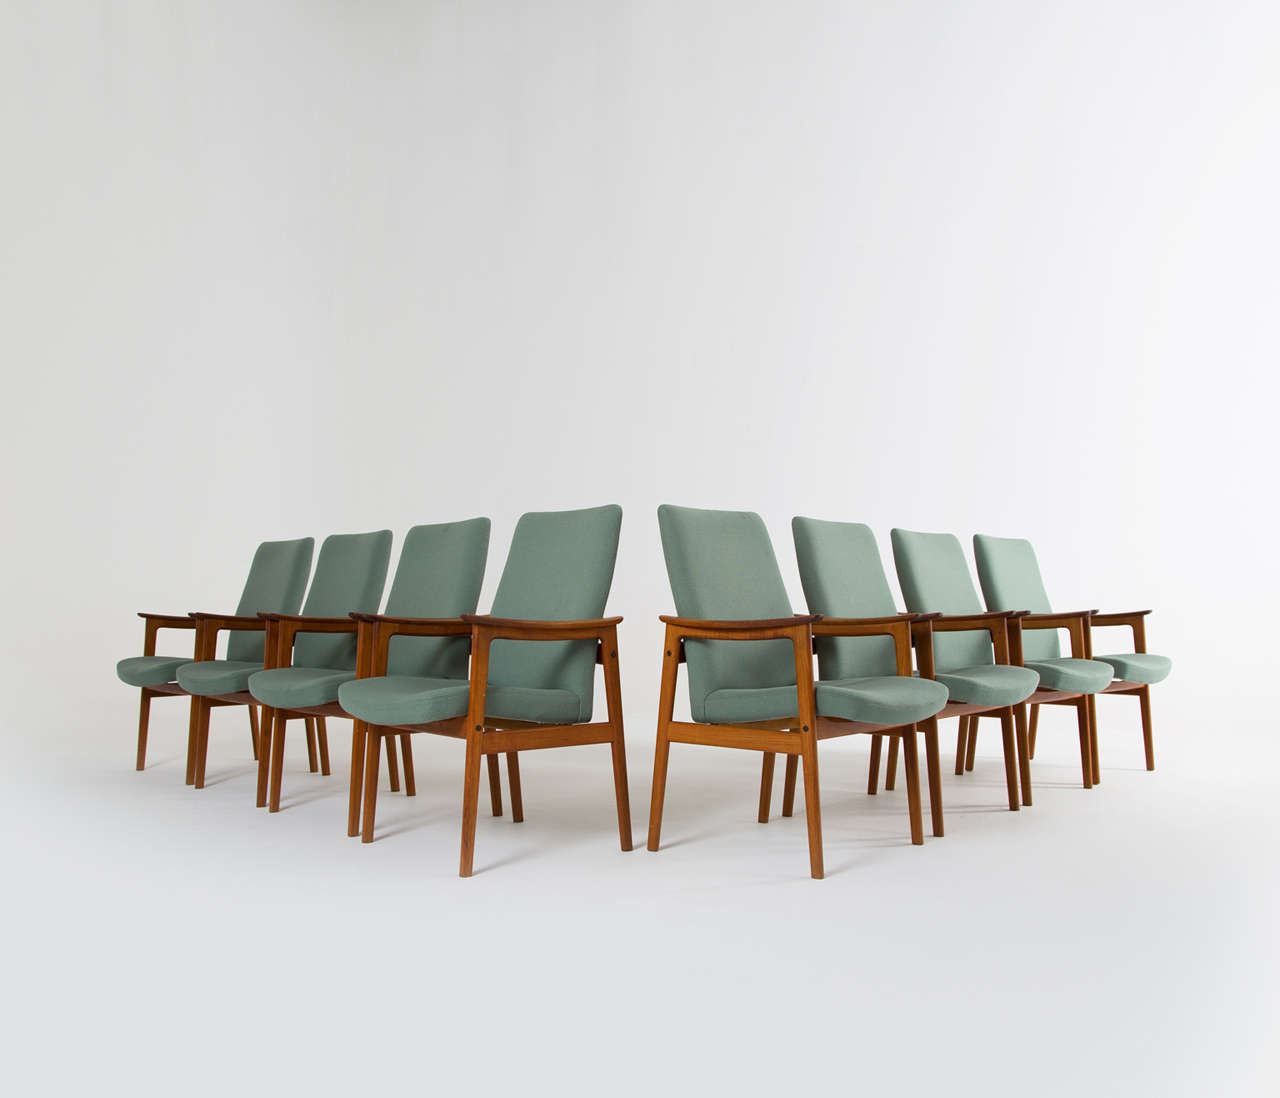 Set of eight danish dining chairs with a solid teak base
and original pastel green upholstery.

Worldwide shipping possibilities;
For competitive delivery quotes and a variety of delivery options and services, ask our in-house shipping